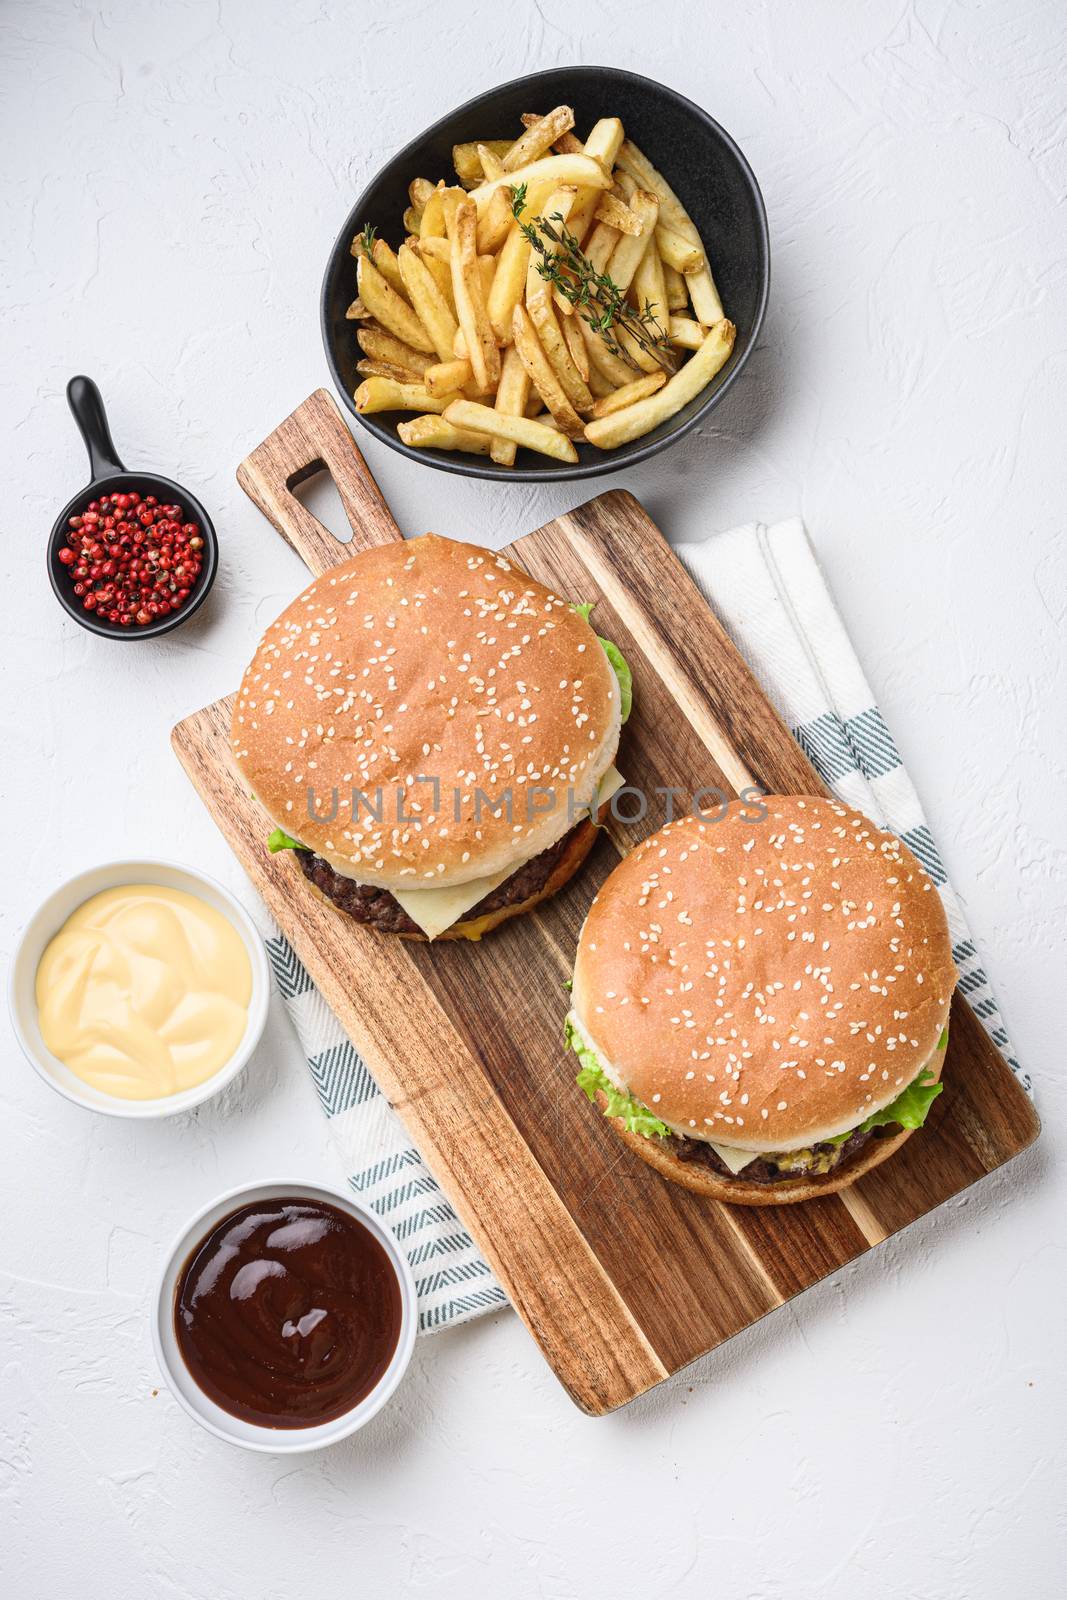 Two ground beef burger and french fries on white textured background.